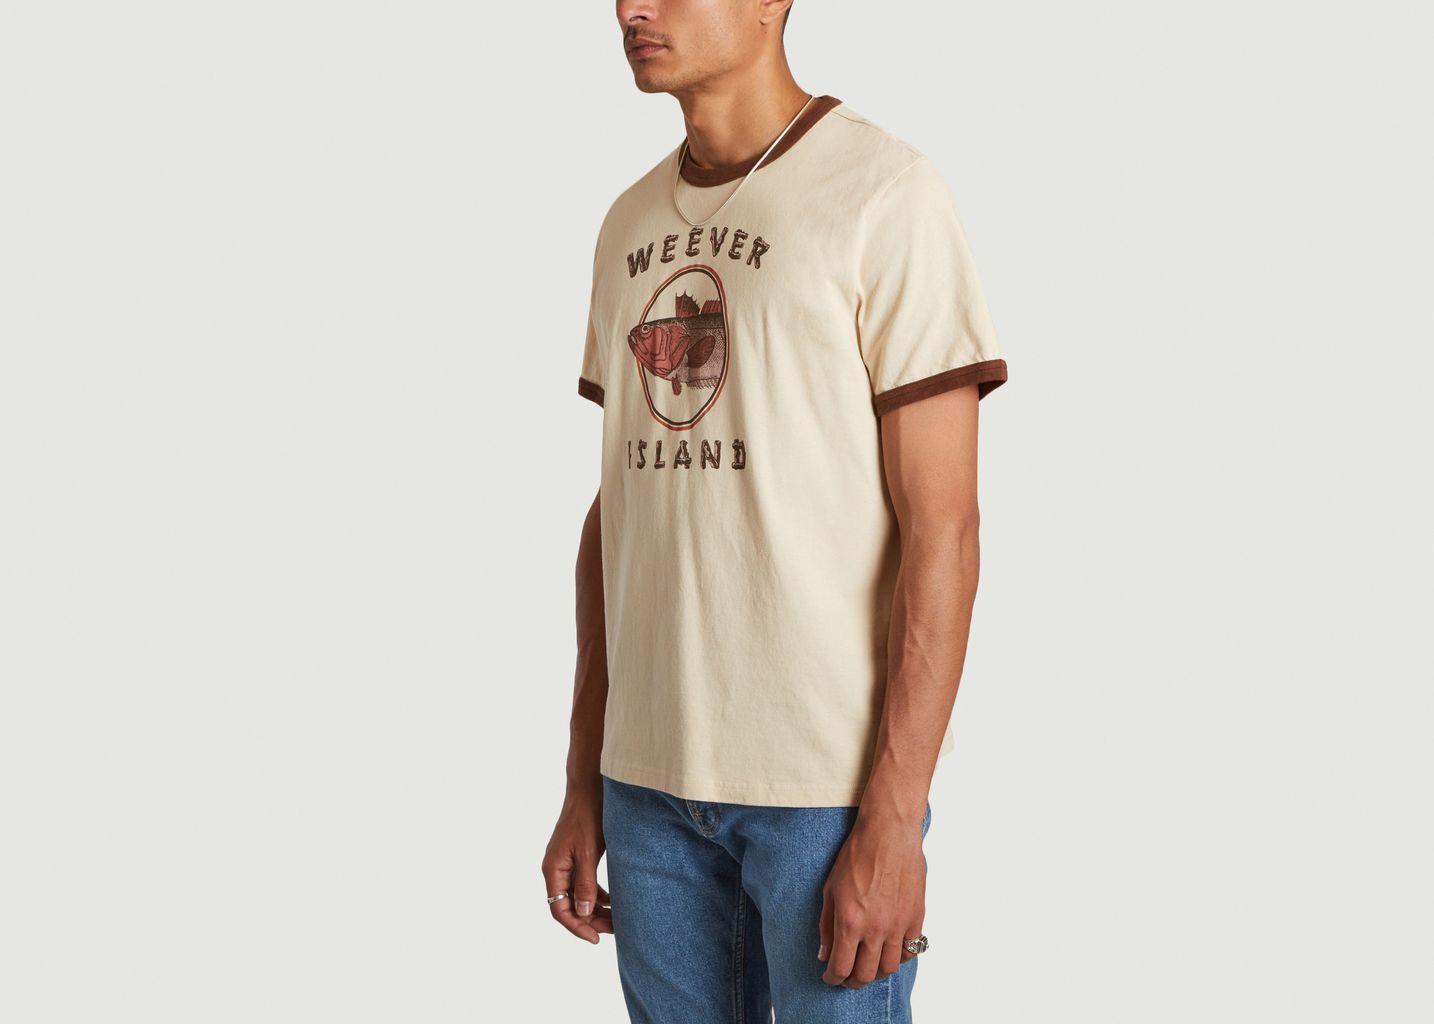 Roy Weever Island Organic Cotton Printed T-Shirt